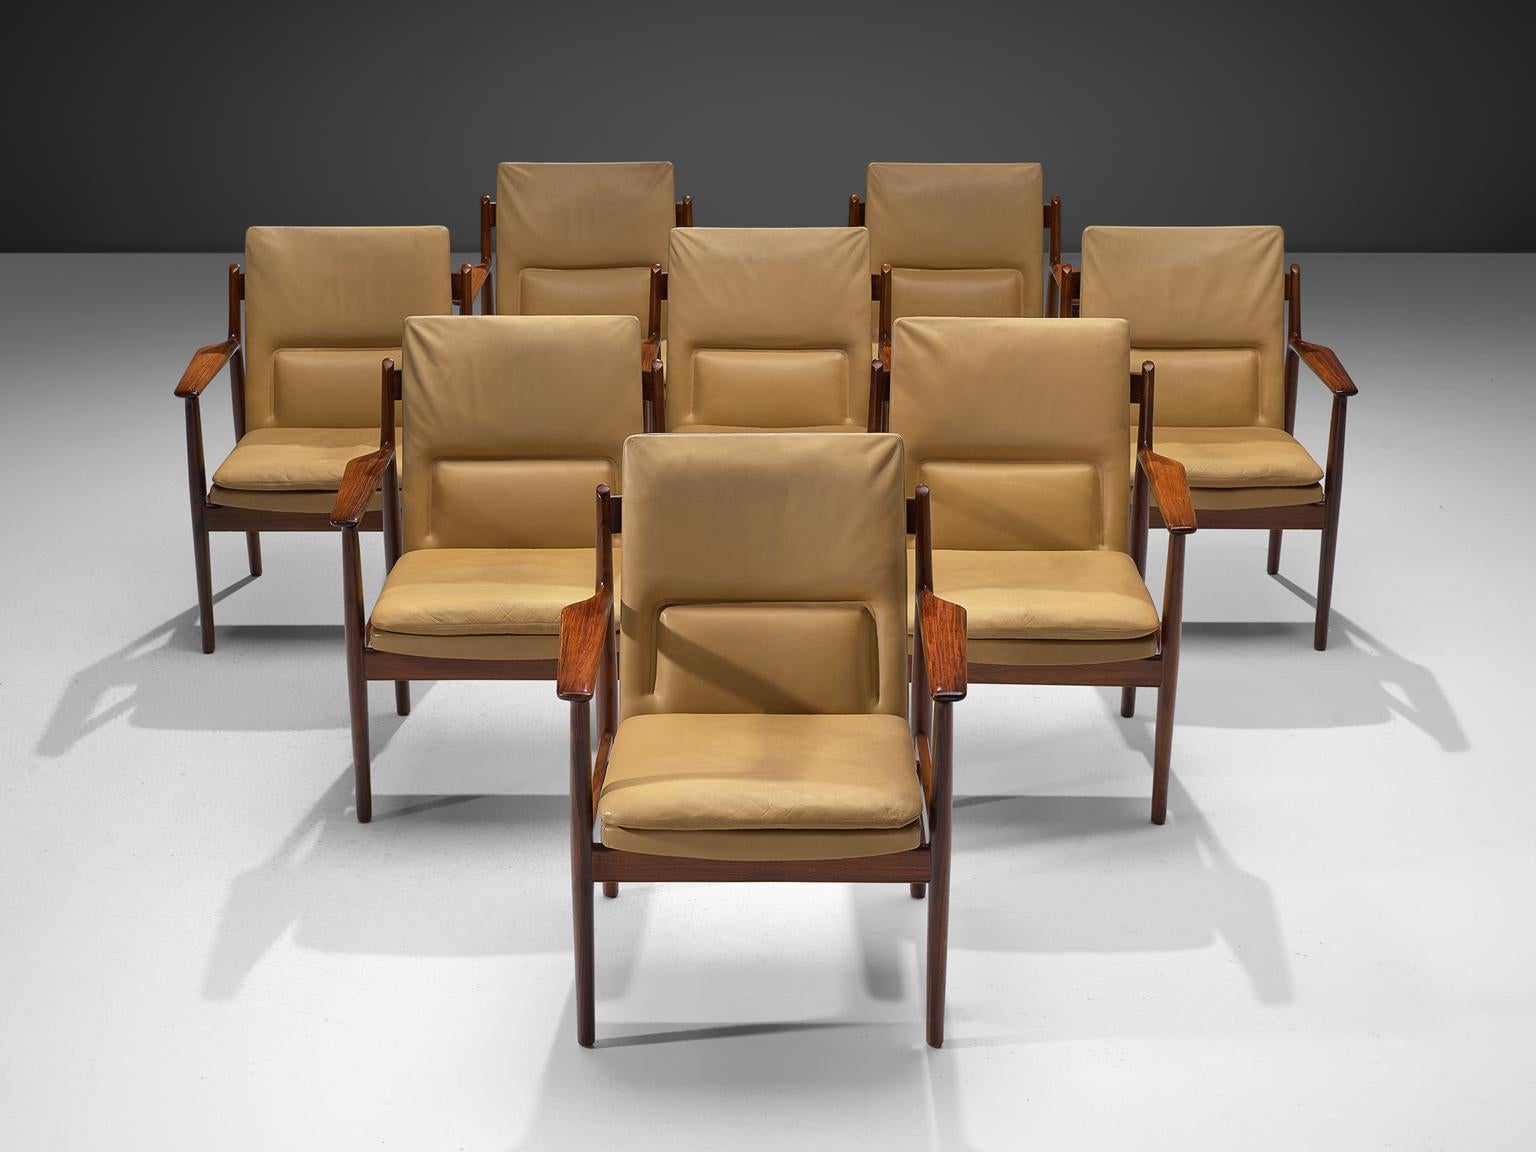 Arne Vodder for Sibast, armchairs model 431, rosewood and natural colored leather, Denmark, 1960s.

This set of 8 chairs is executed in original beige leather and rosewood, designed by the Danish designer Arne Vodder. These chairs are good